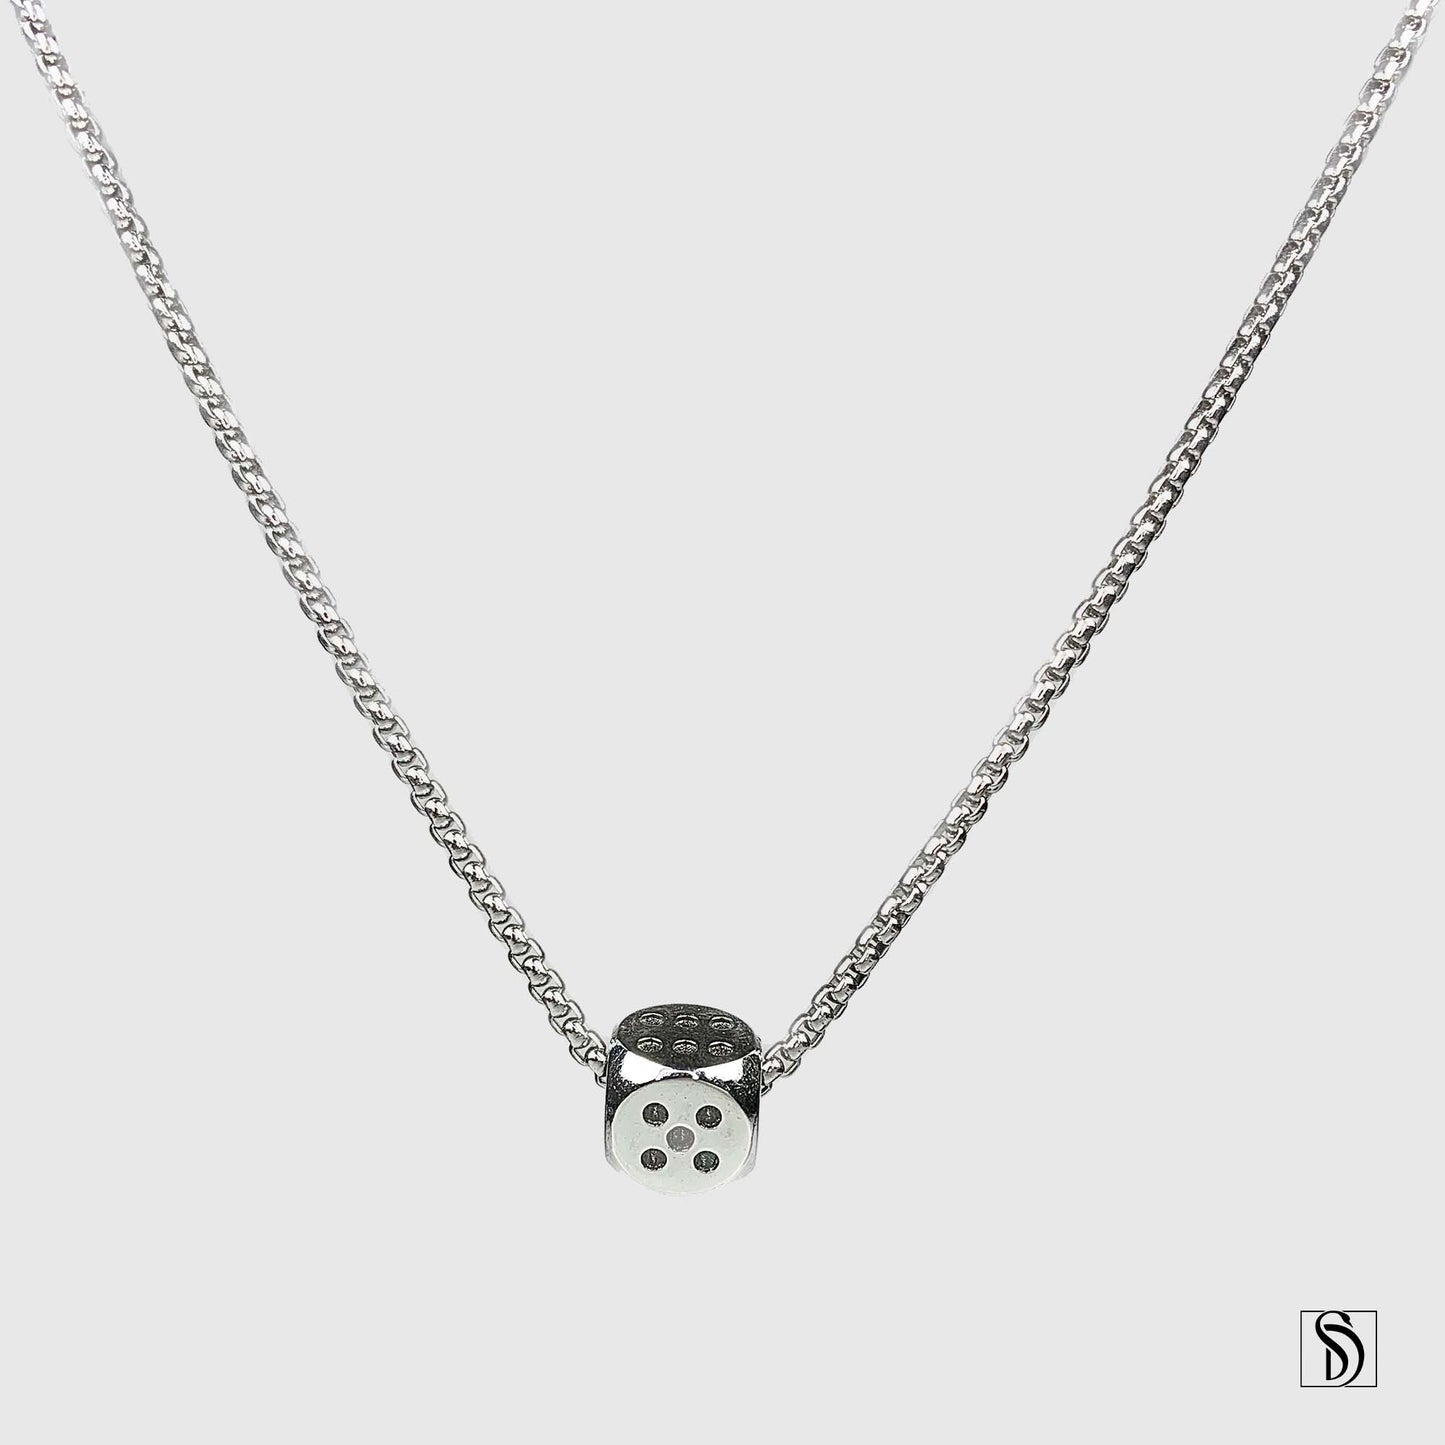 Silver Dice Charm Necklace